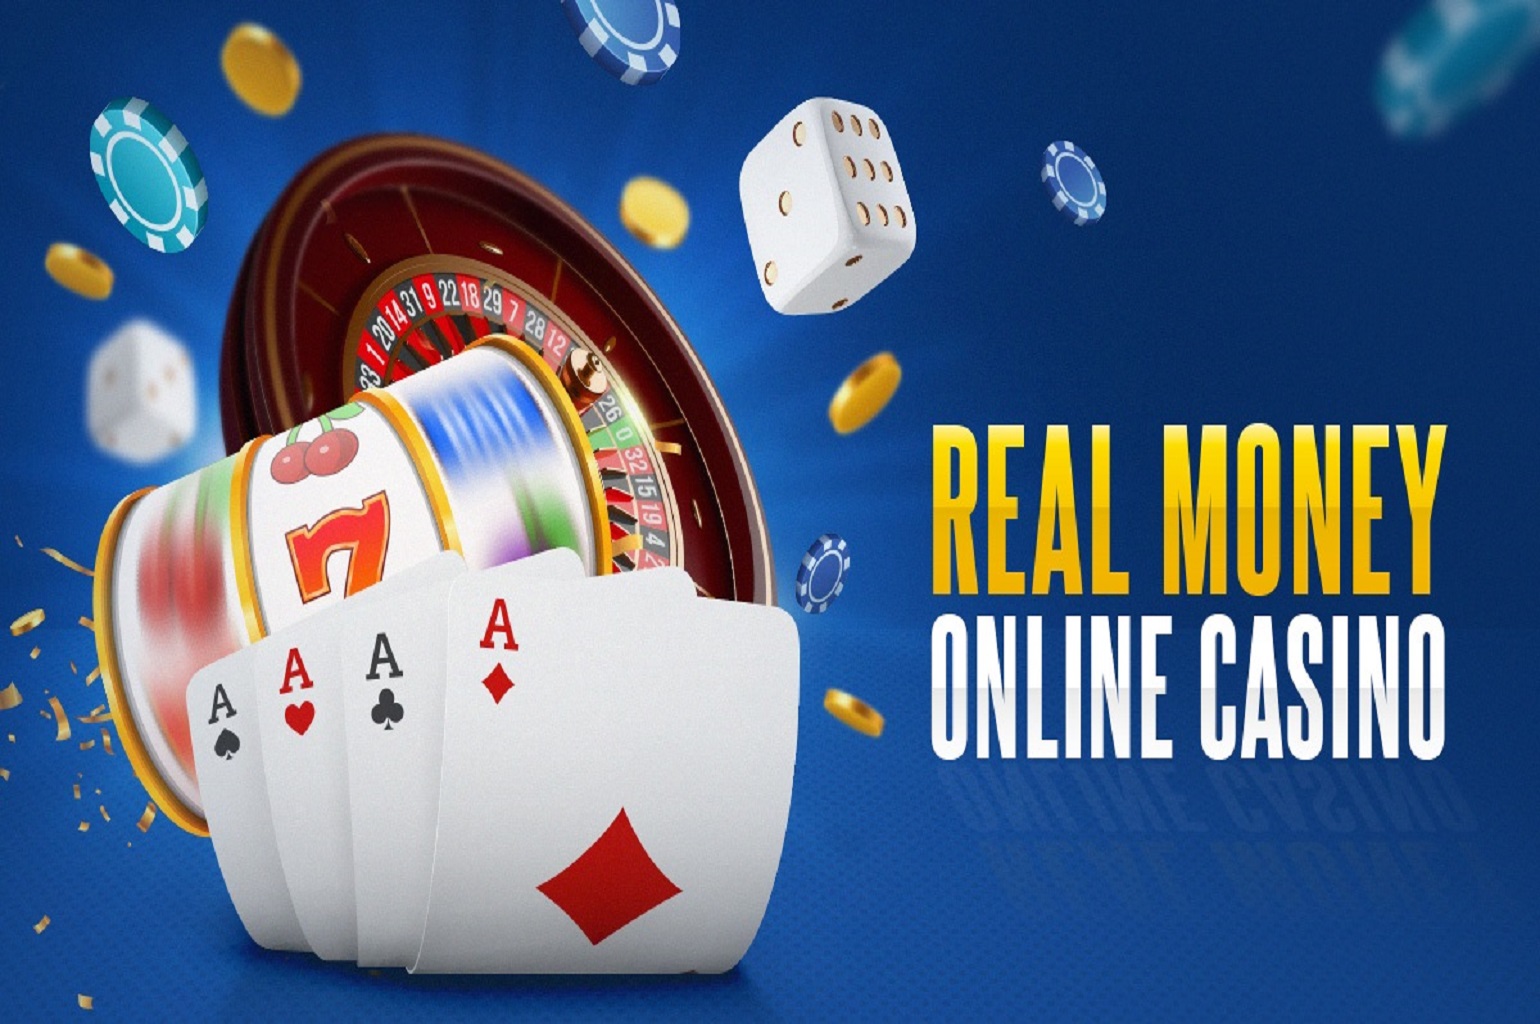 The Stuff About casino online canada You Probably Hadn't Considered. And Really Should